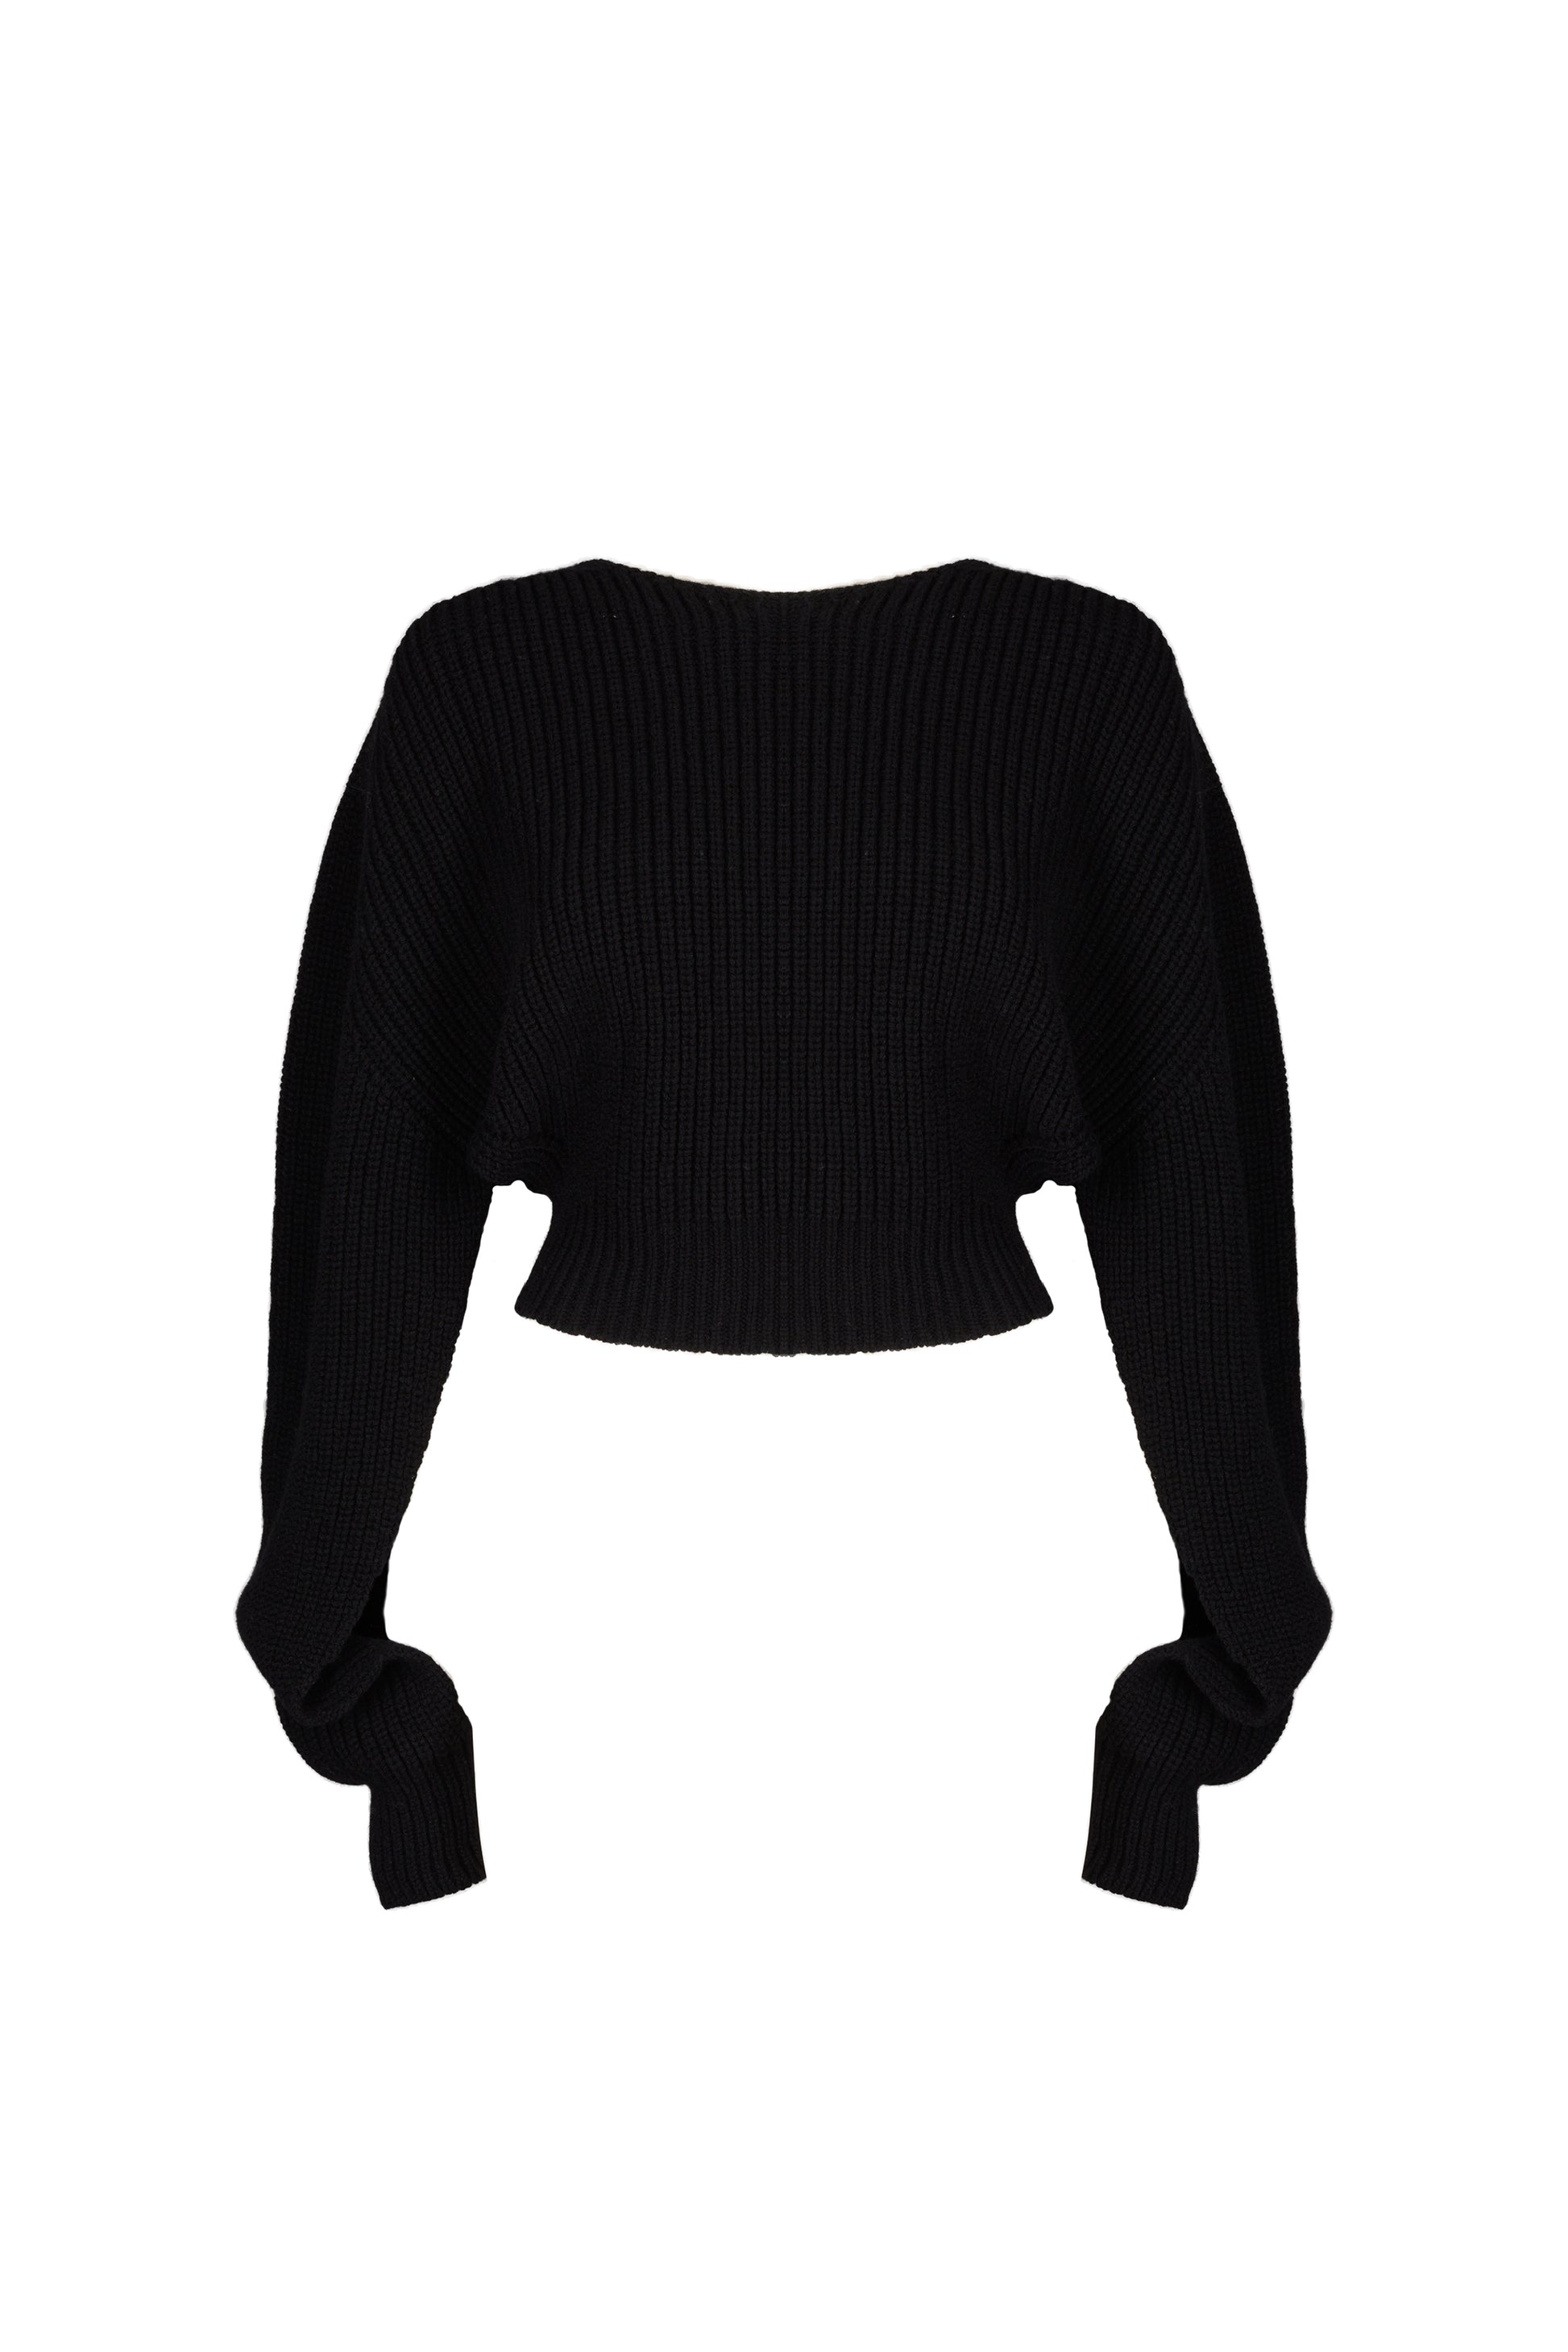 Black cropped chunky knit jumper with open sides and sleeves design, featuring a ribbed texture for a bold and edgy style